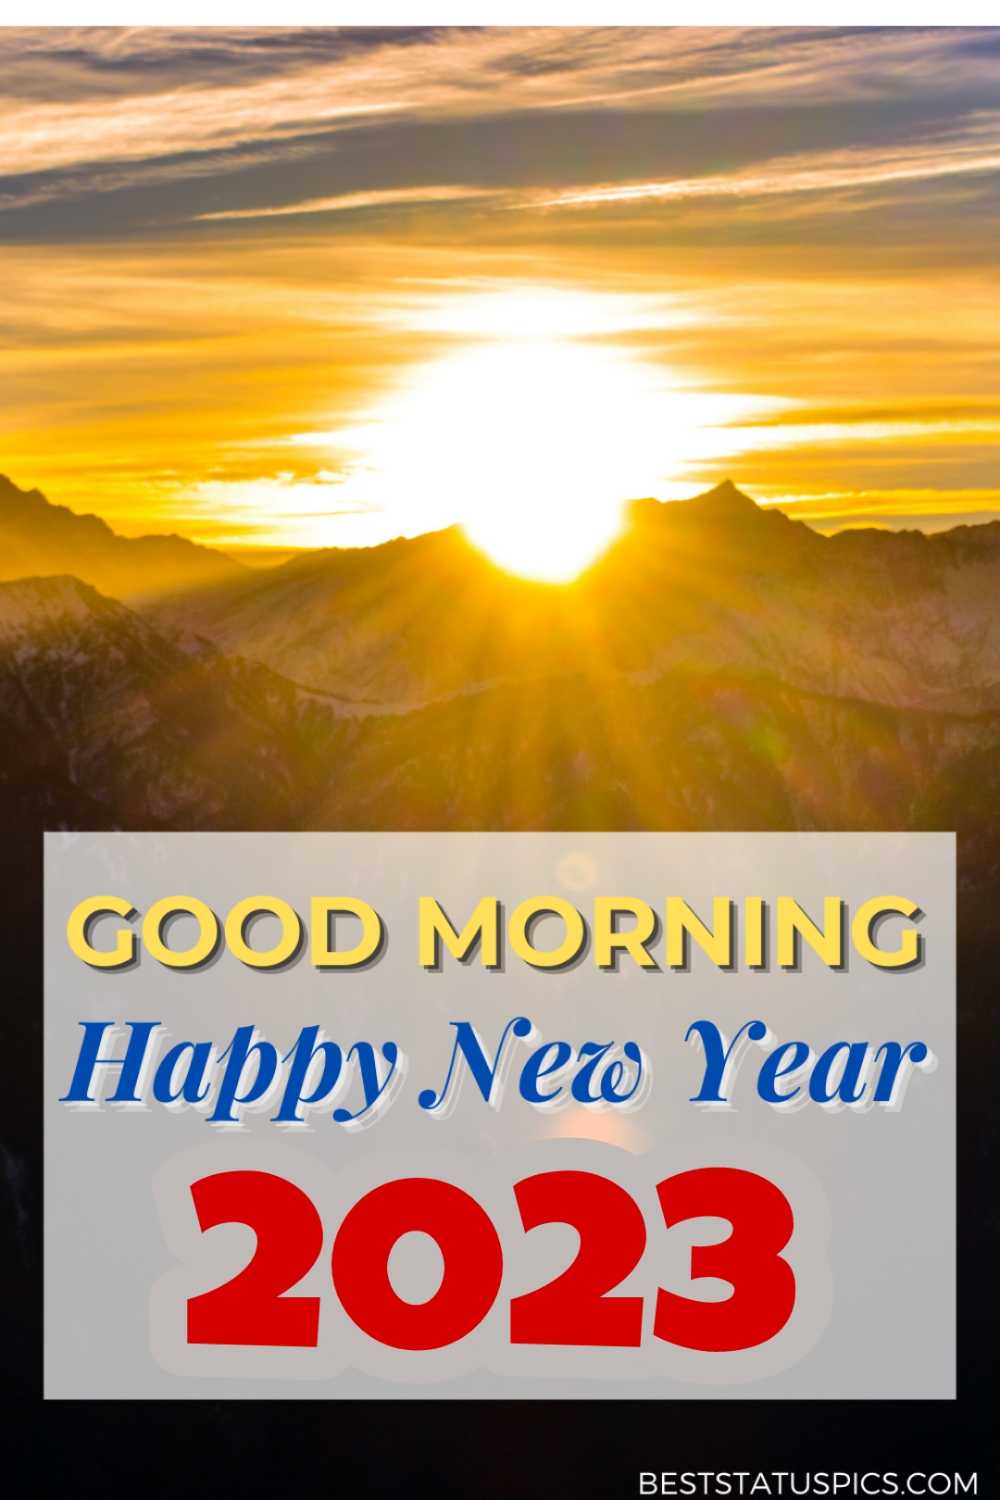 Happy New Year 2023 Good Morning images HD with sunrise and mountain for Whatsapp DP